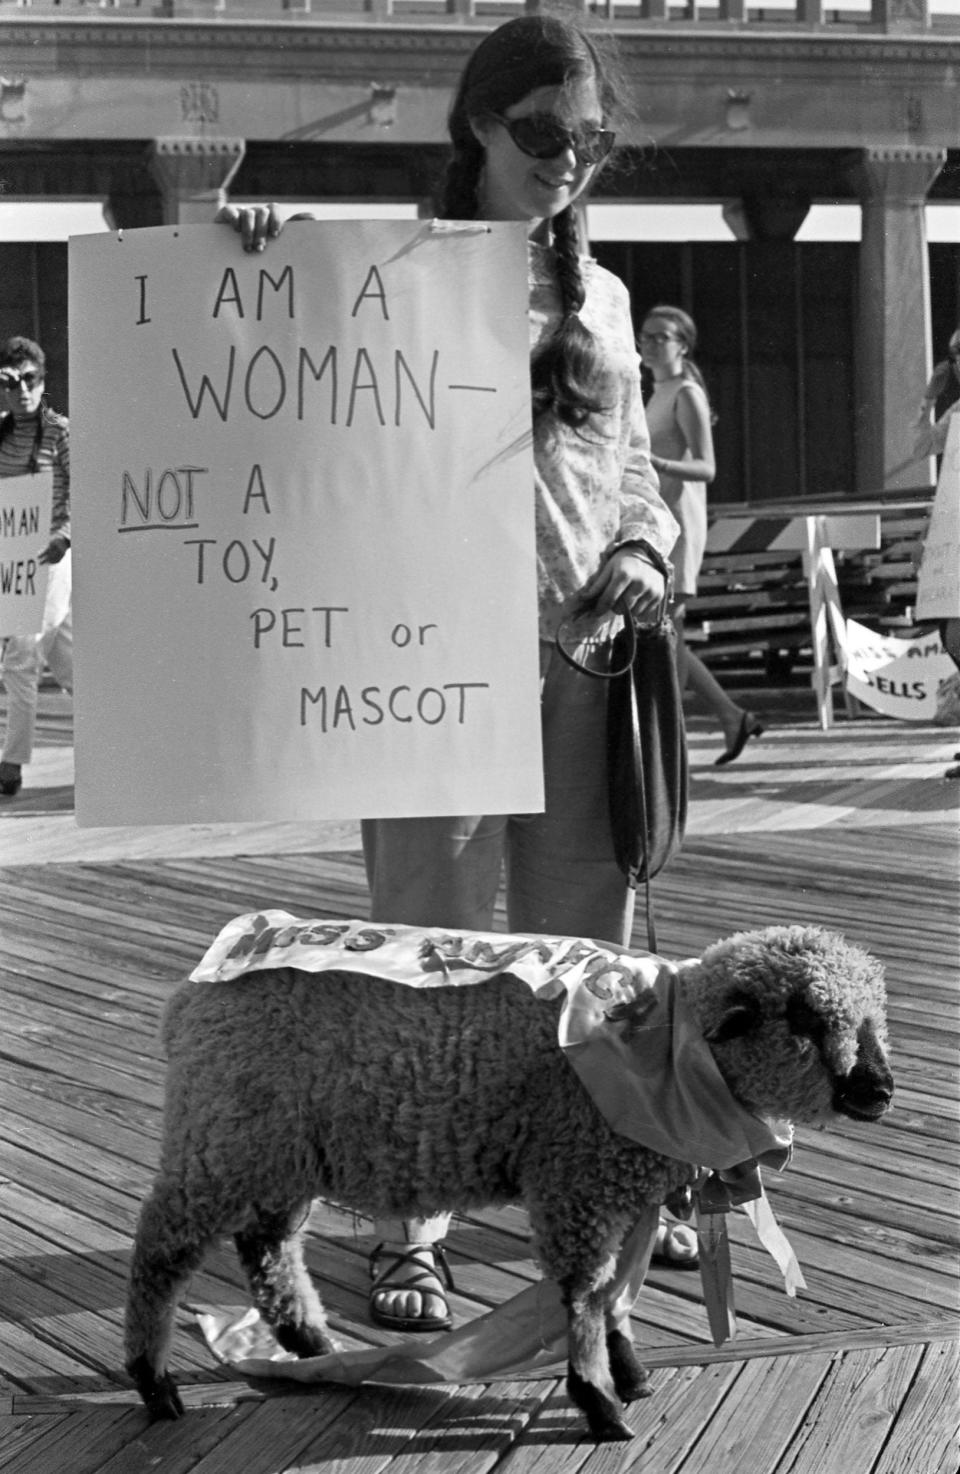 A demonstrator during “No More Miss America” holds a sign saying she is not a toy, pet, or mascot in 1968.